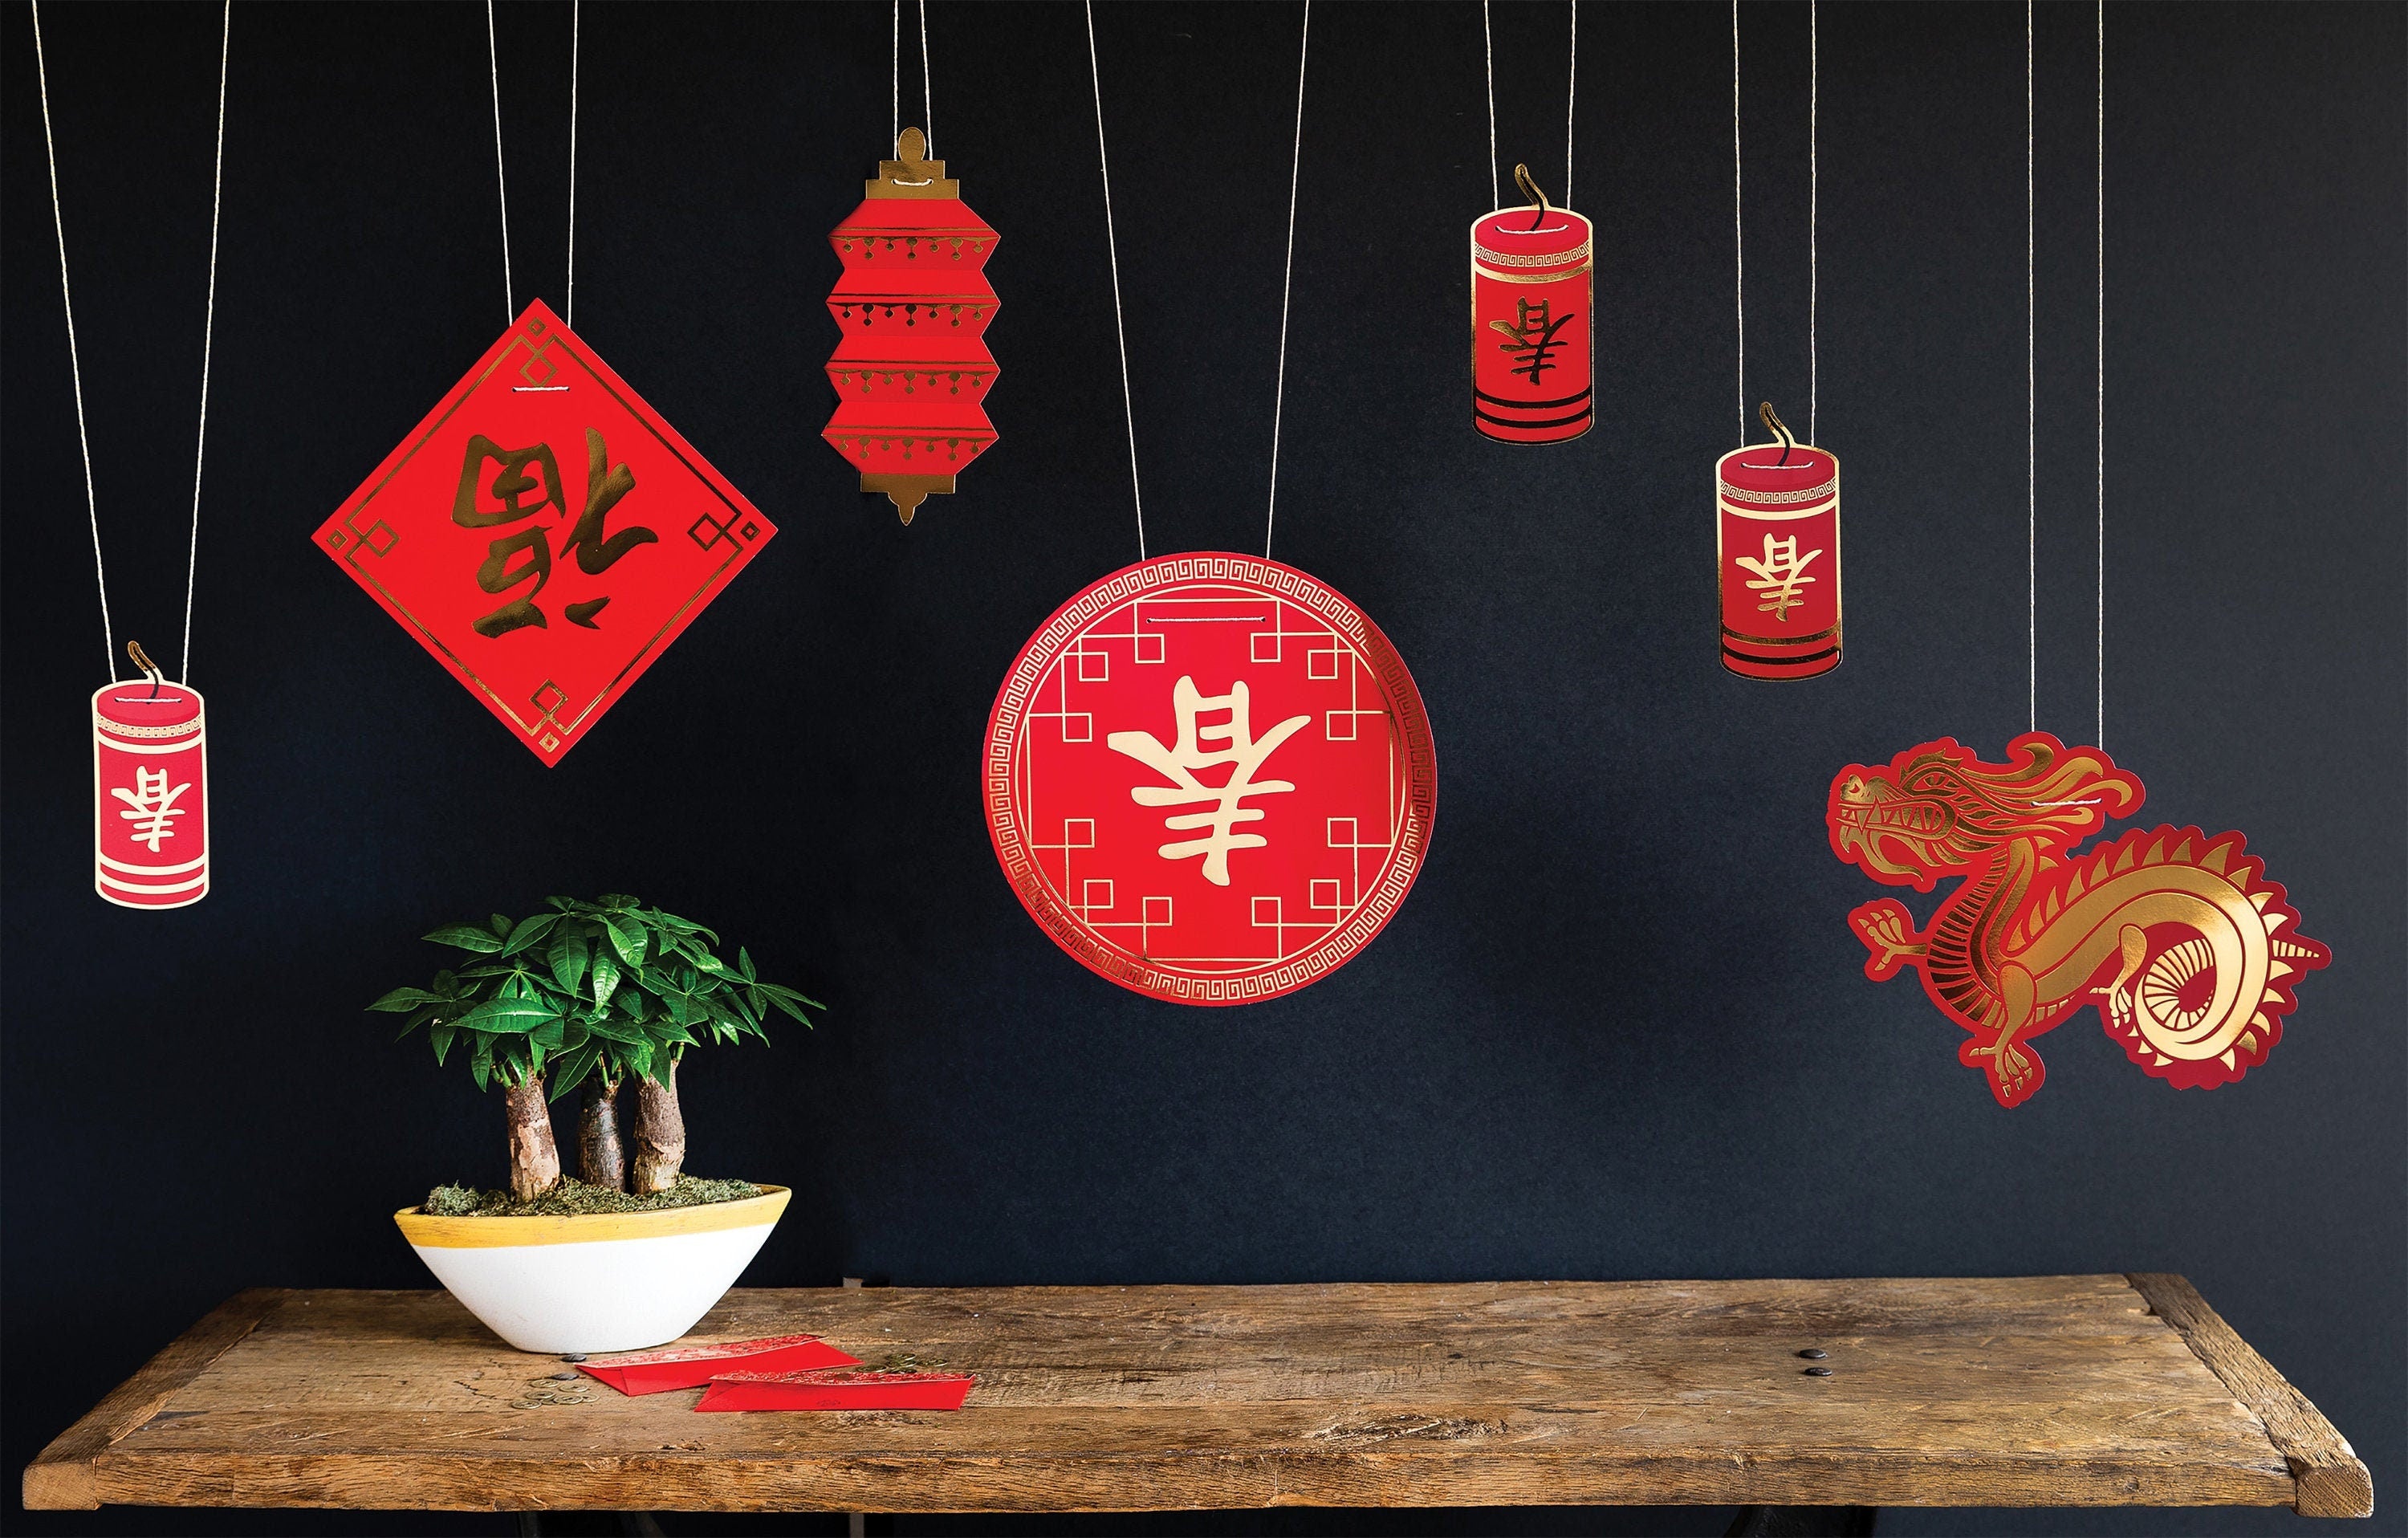 Lunar New Year Decorations | Chinese New Year Decorations - Chinese New Year Party - Chinese Party Decorations - Chinese Theme Decoration